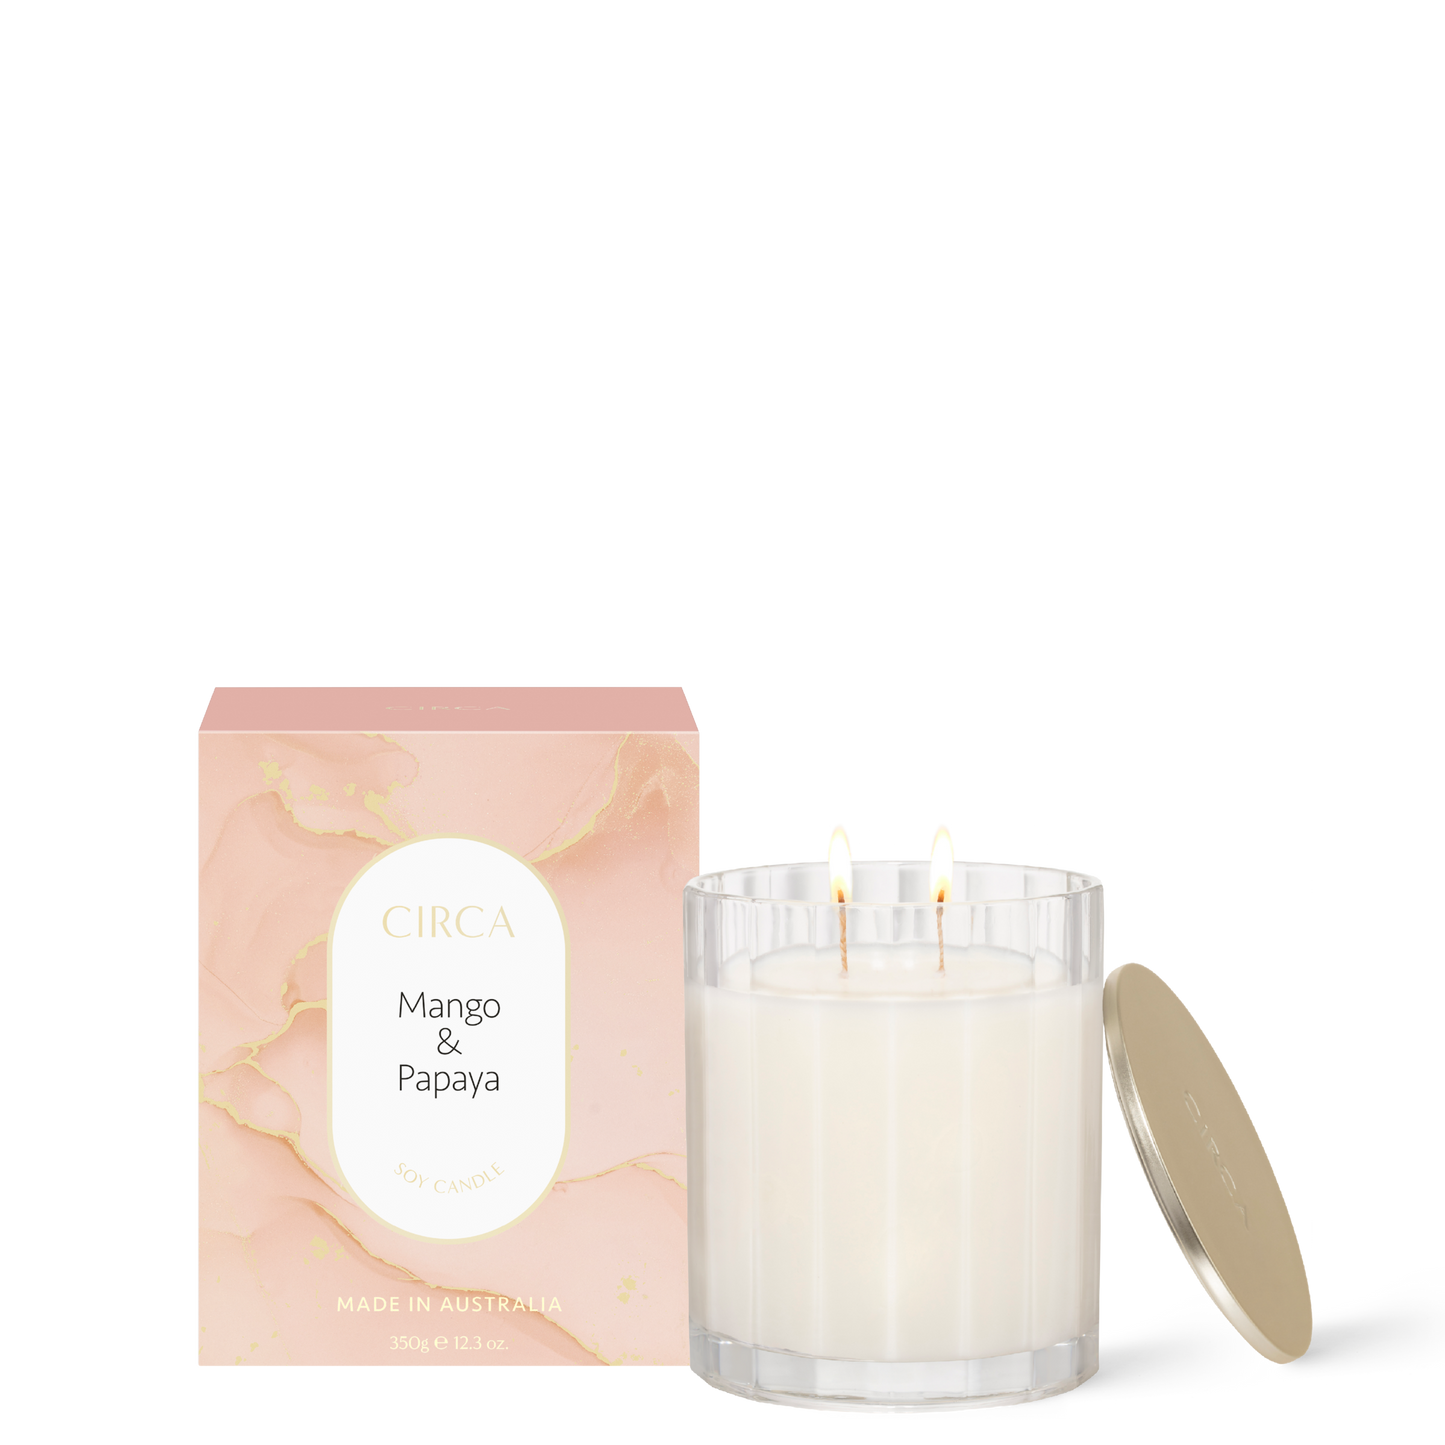 CIRCA 350g Soy Candle